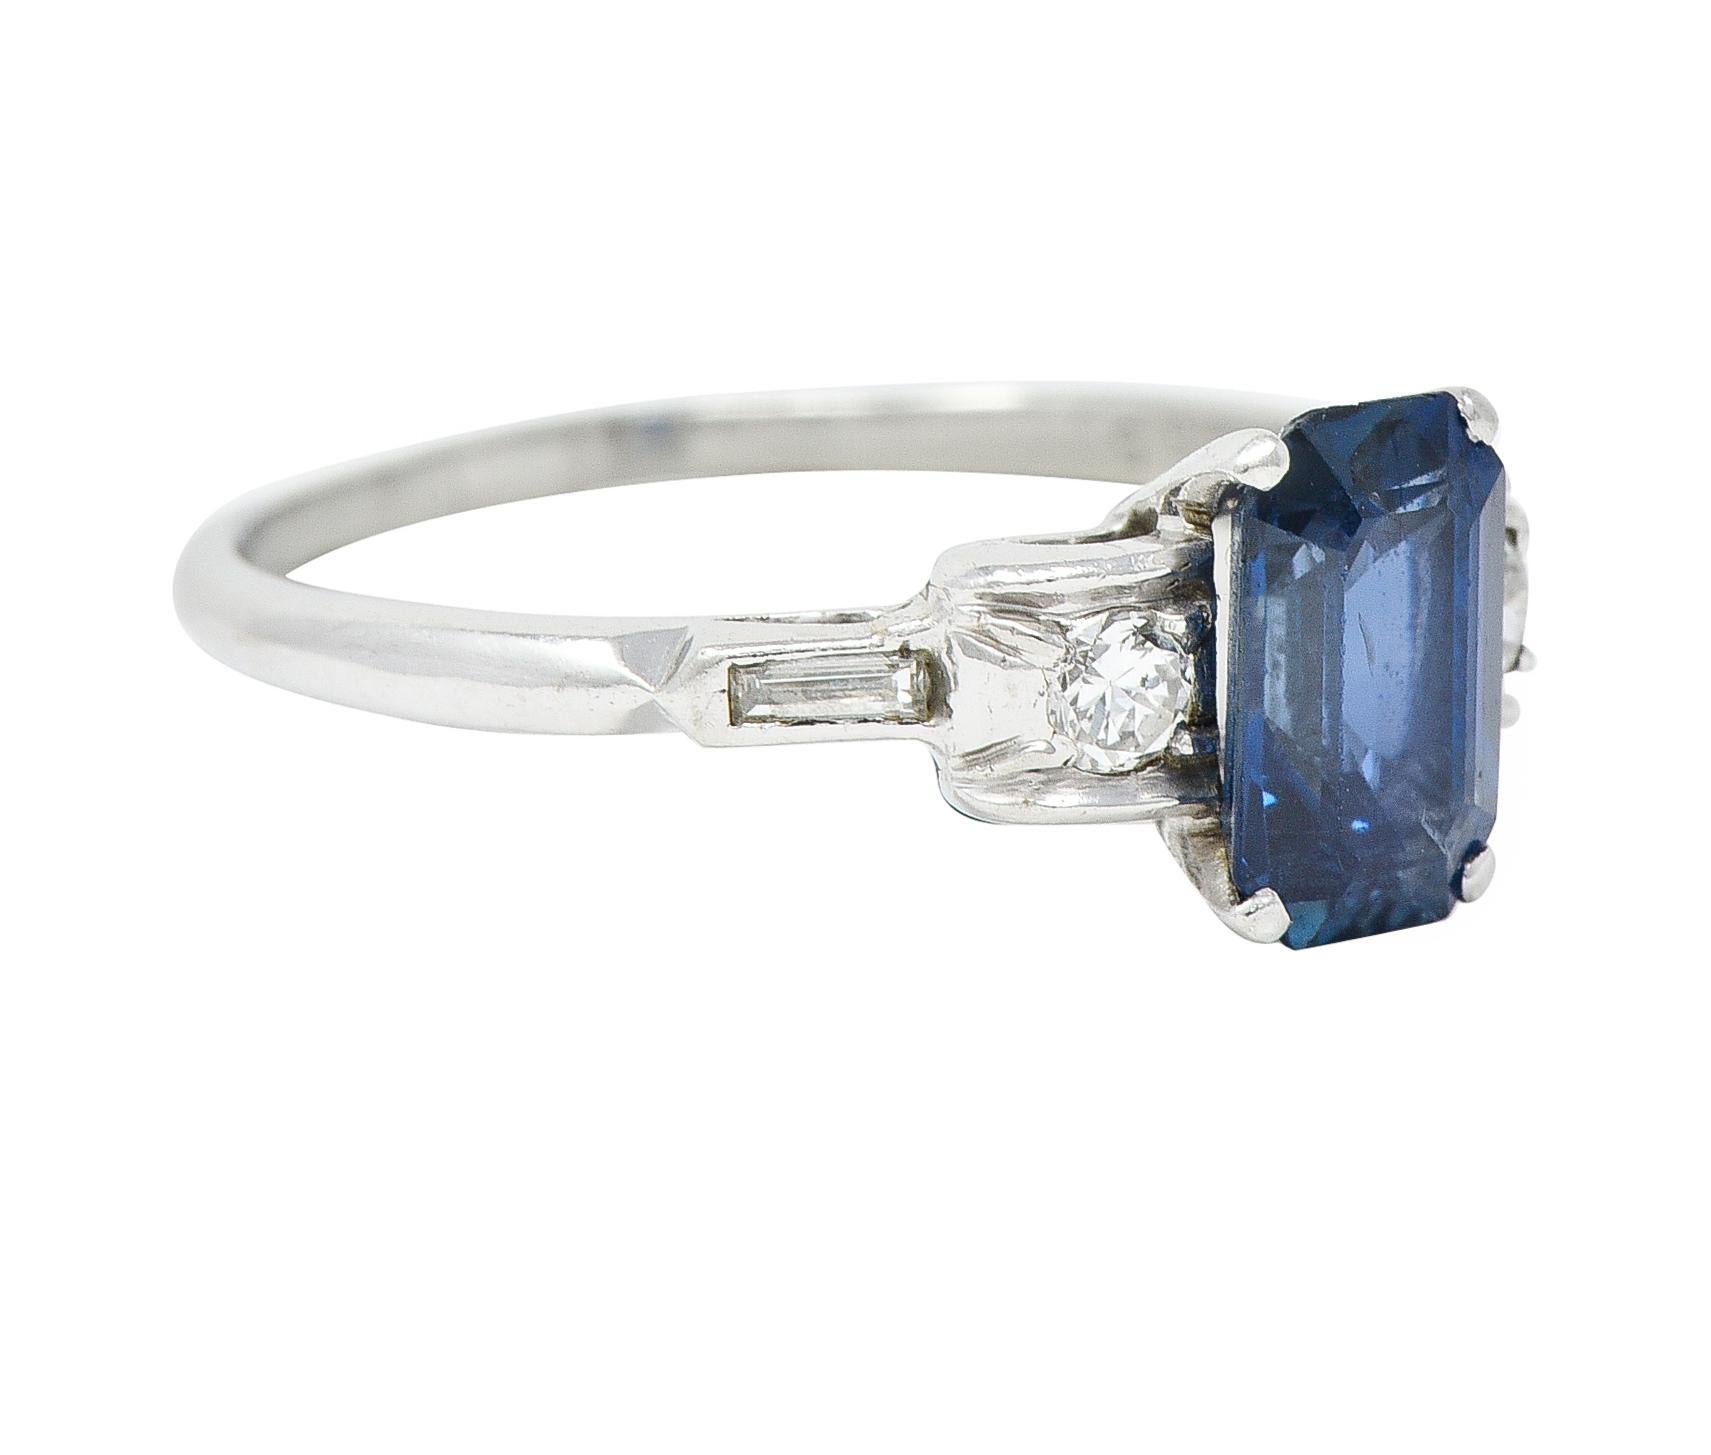 Centering an emerald cut sapphire weighing approximately 1.51 carats total - transparent medium blue
Prong set in a basket and flanked by arching cathedral shoulders with flush set diamonds
Old European and baguette cut - weighing approximately 0.16